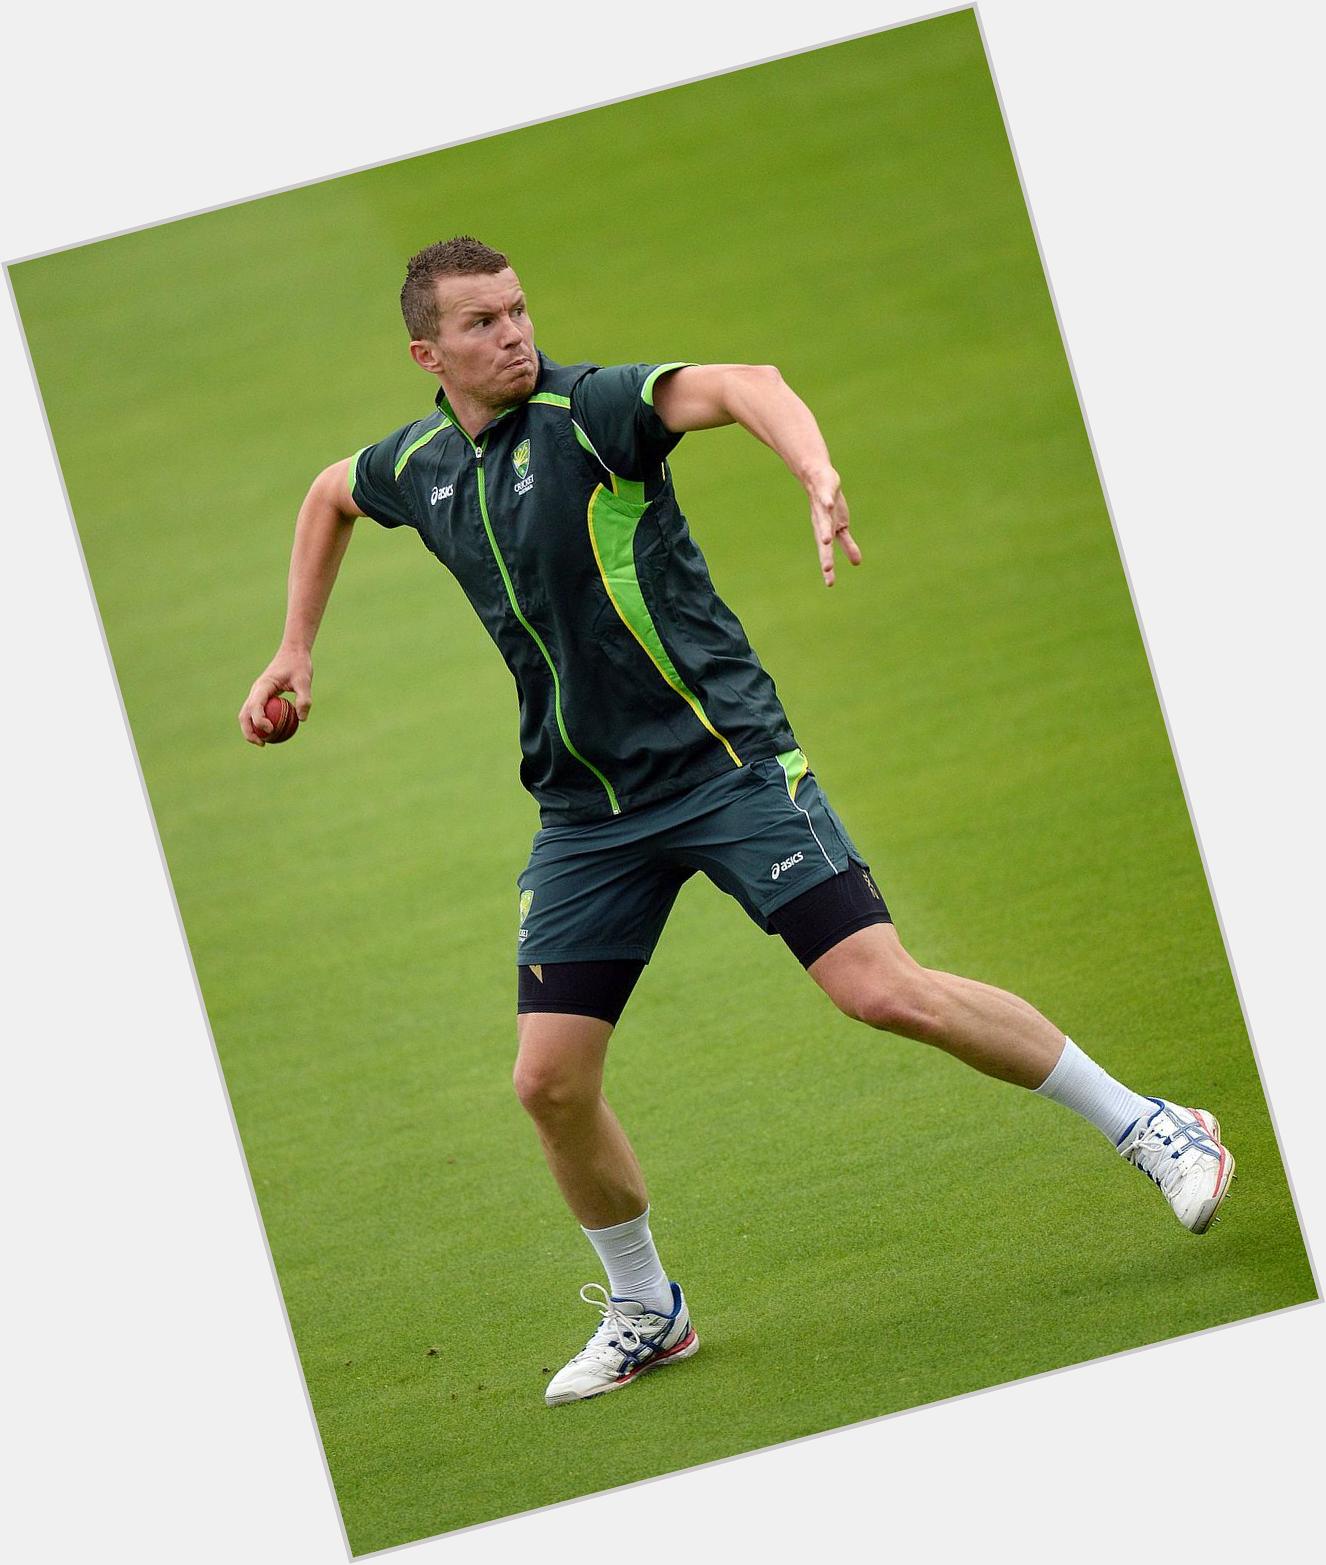 Http://fanpagepress.net/m/P/Peter Siddle Dating 2